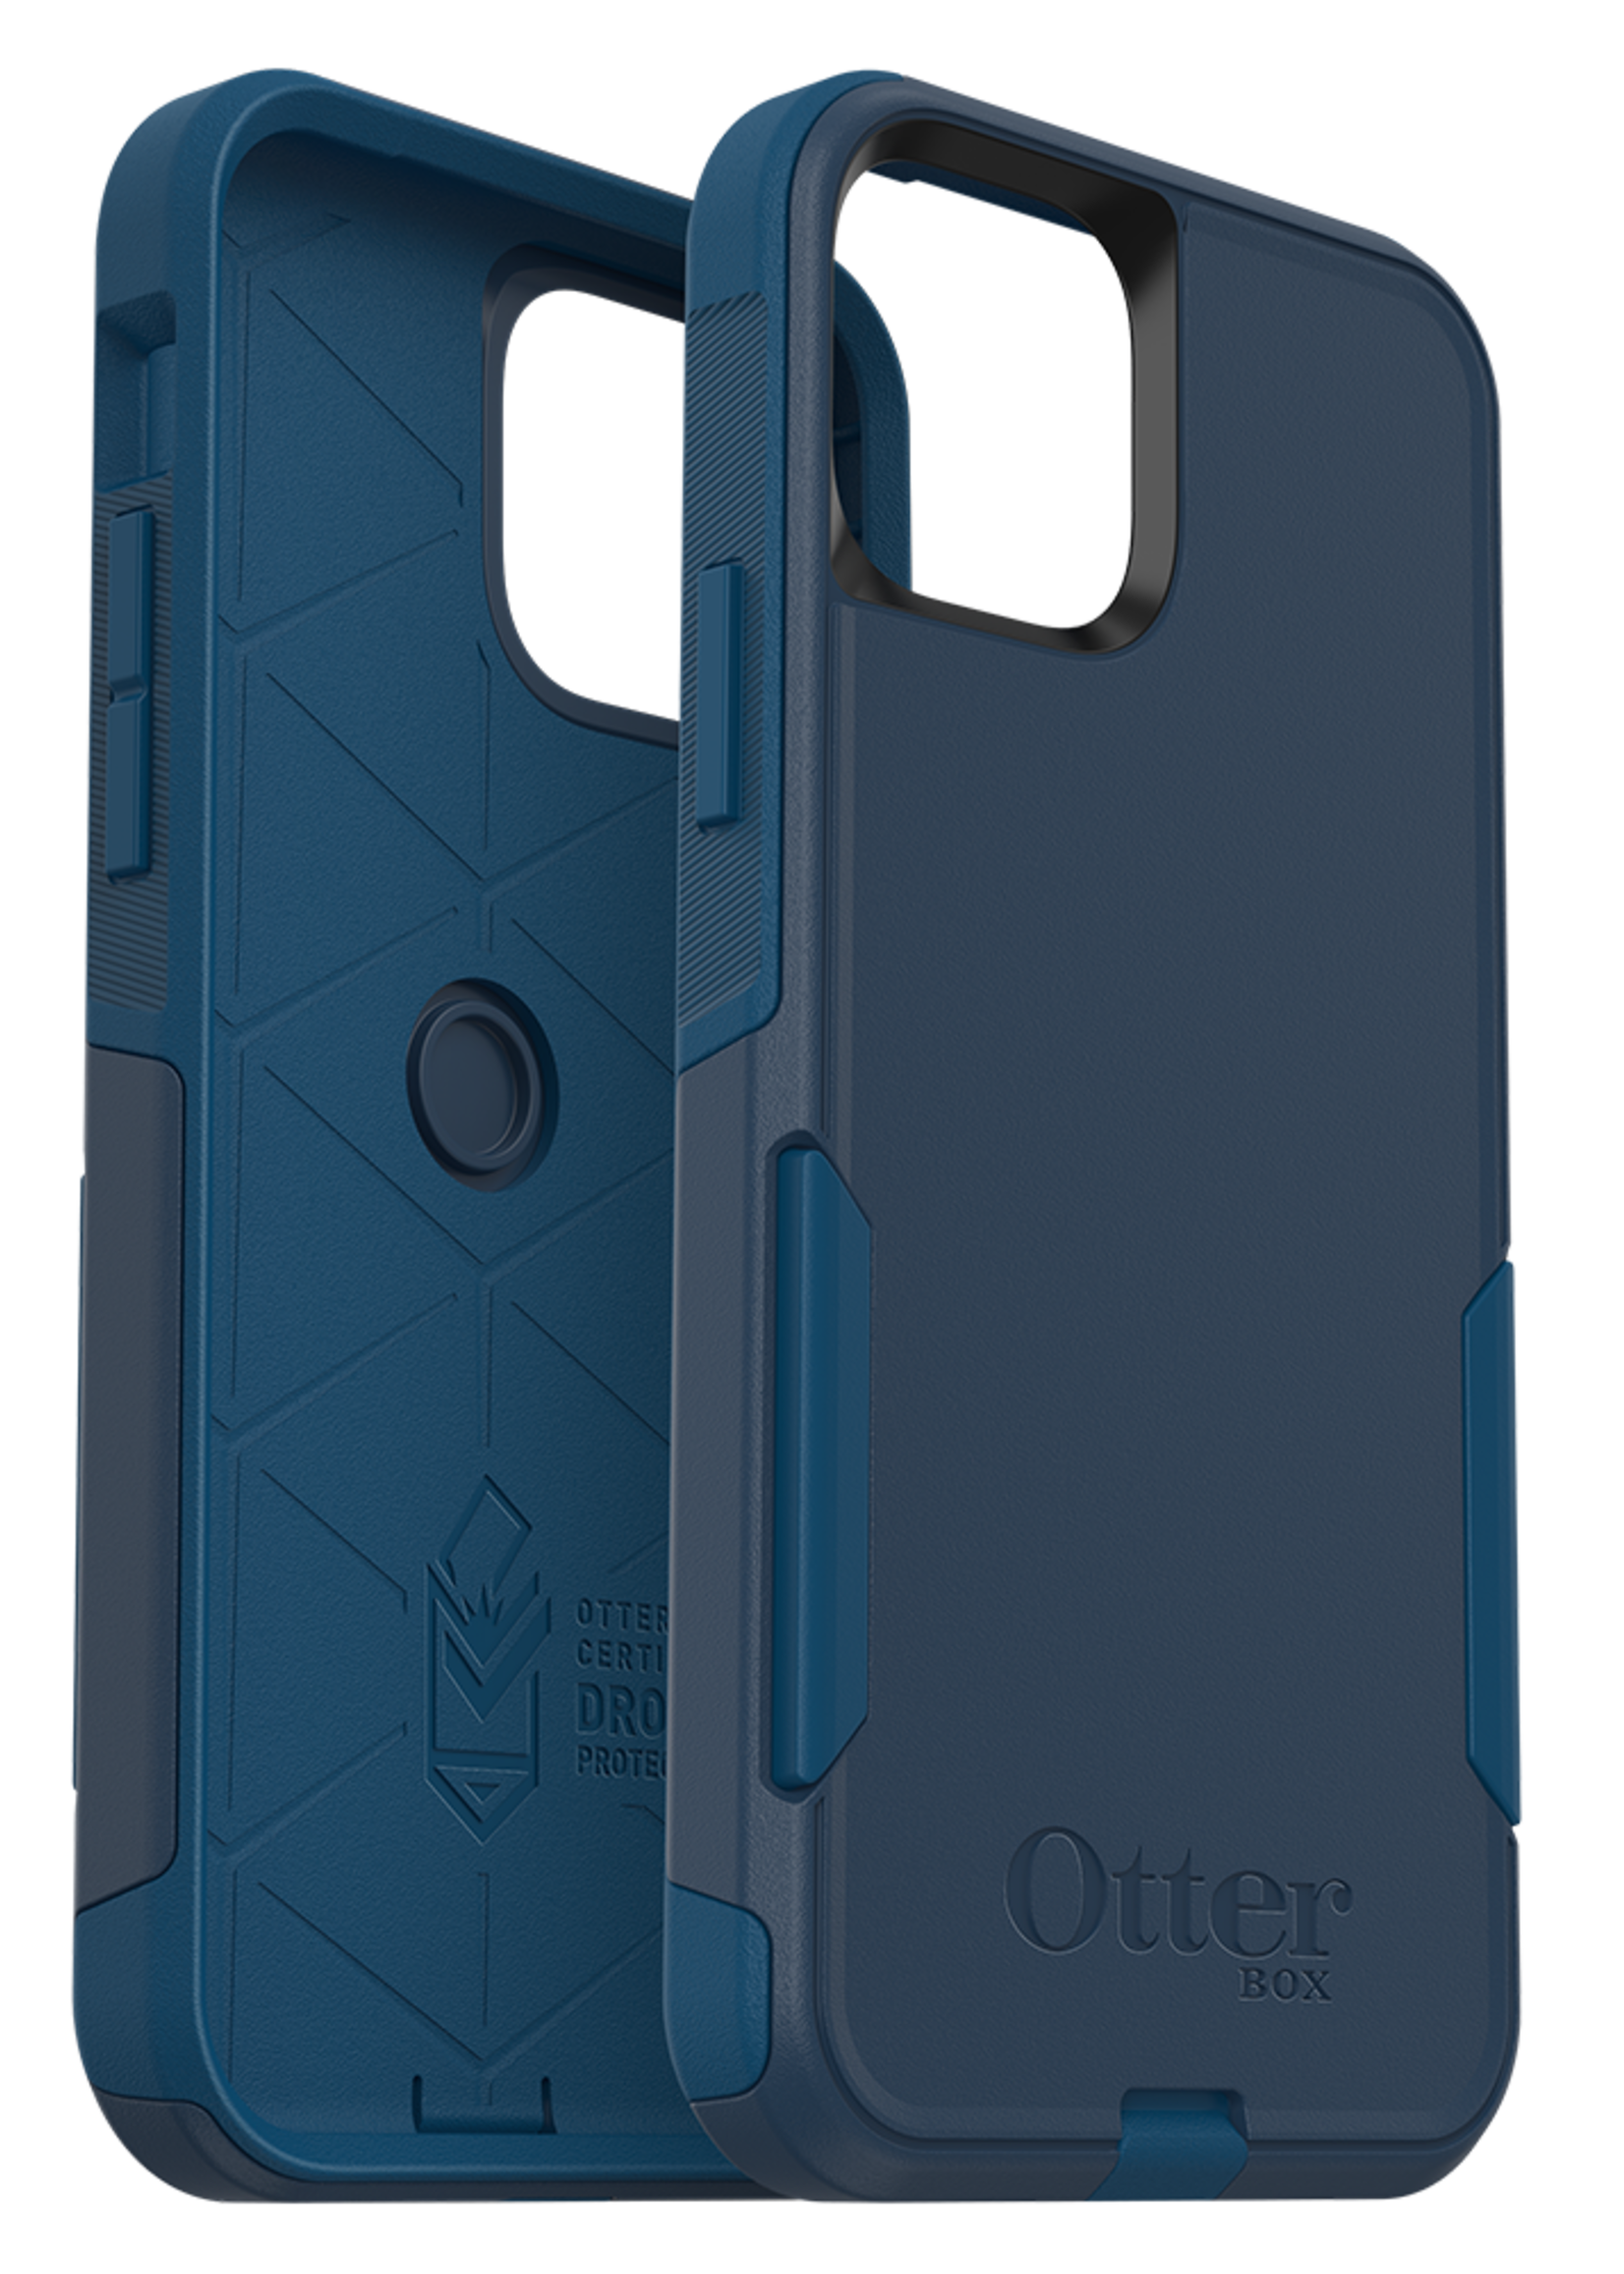 Otterbox OtterBox - Commuter Case for Apple iPhone 11 Pro - Bespoke Way